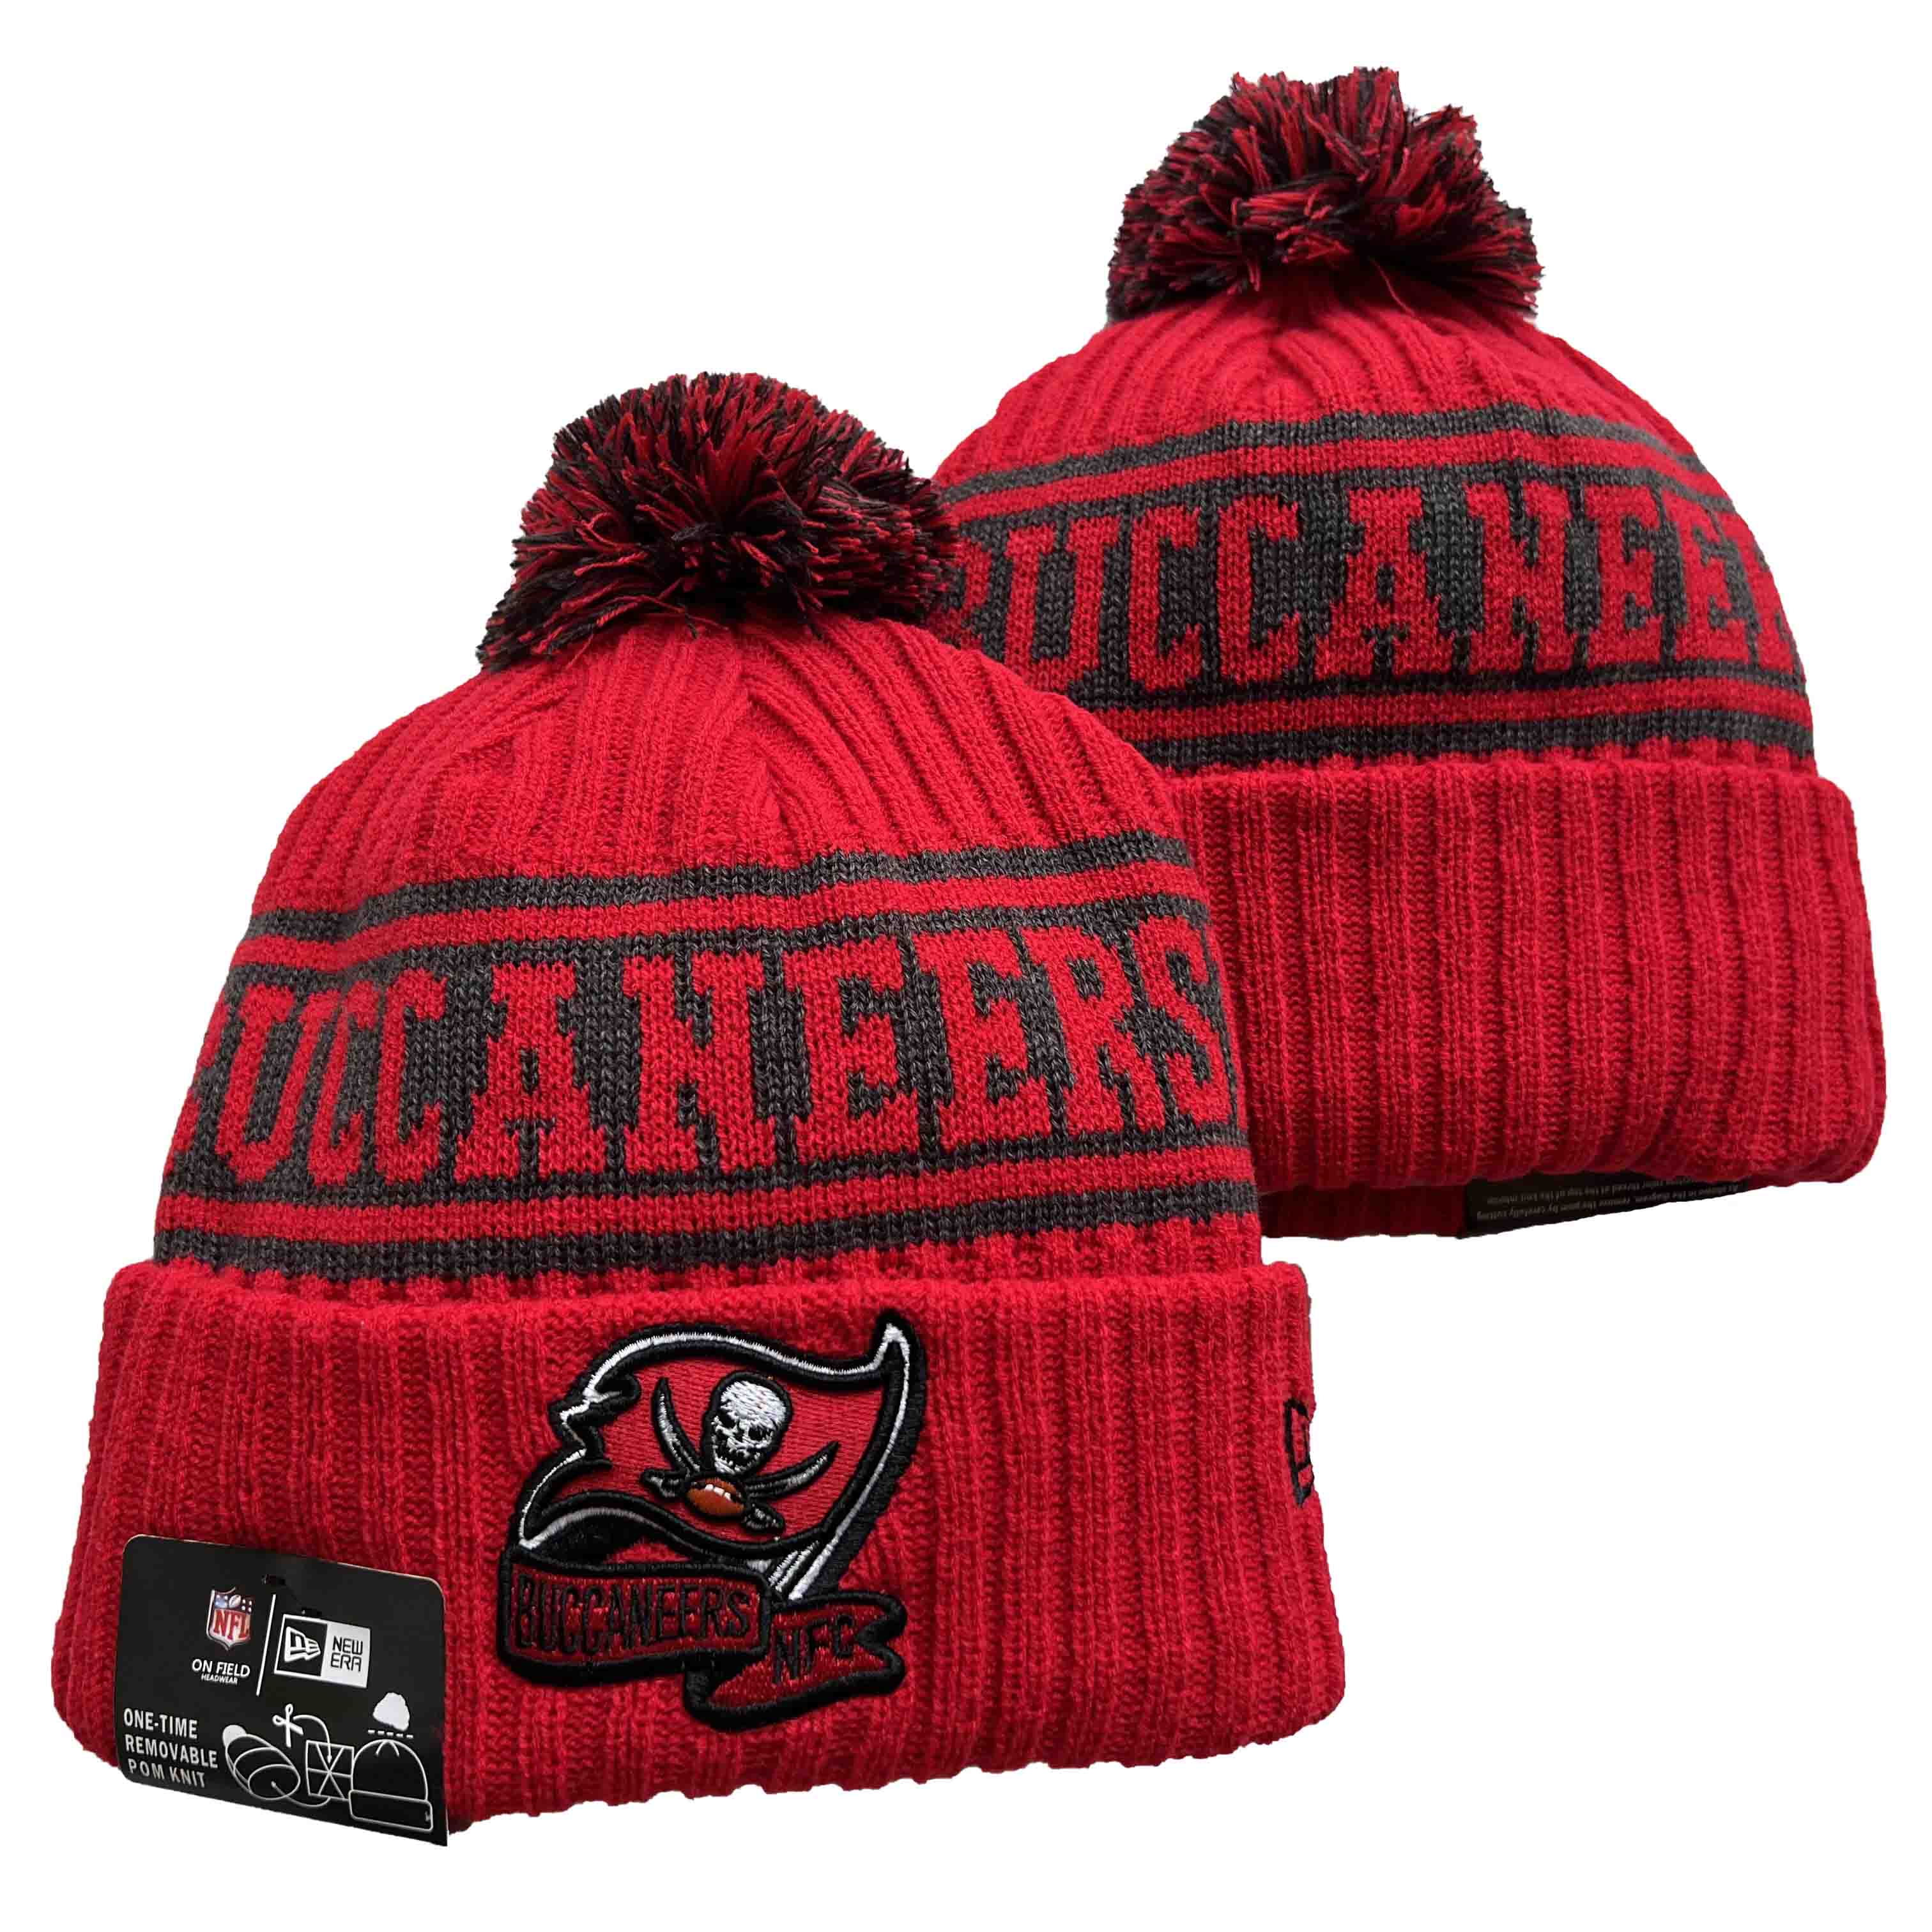 Tampa Bay Buccaneers Knit Hats -8